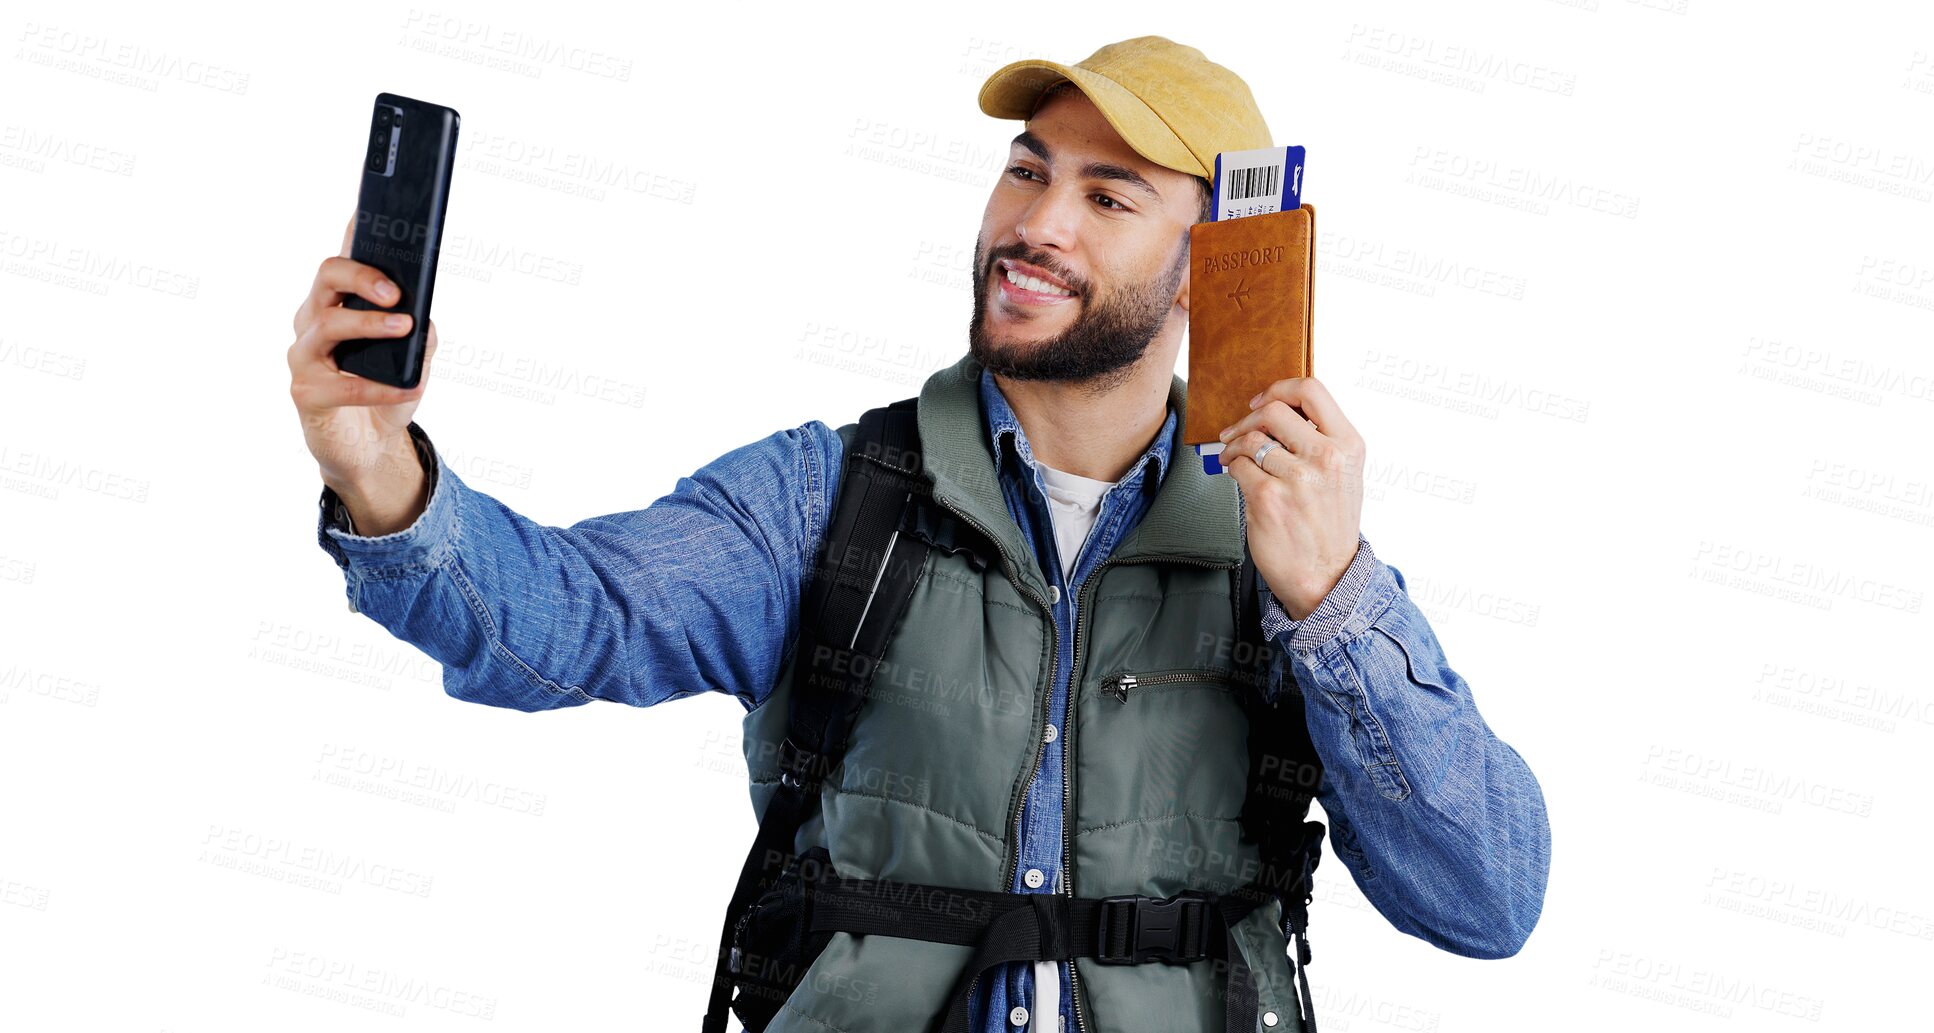 Buy stock photo Happy man, passport and selfie of backpacker in photography, picture or memory on a transparent PNG background. Smile, male person or young tourist with ID, boarding pass or ticket for travel photo